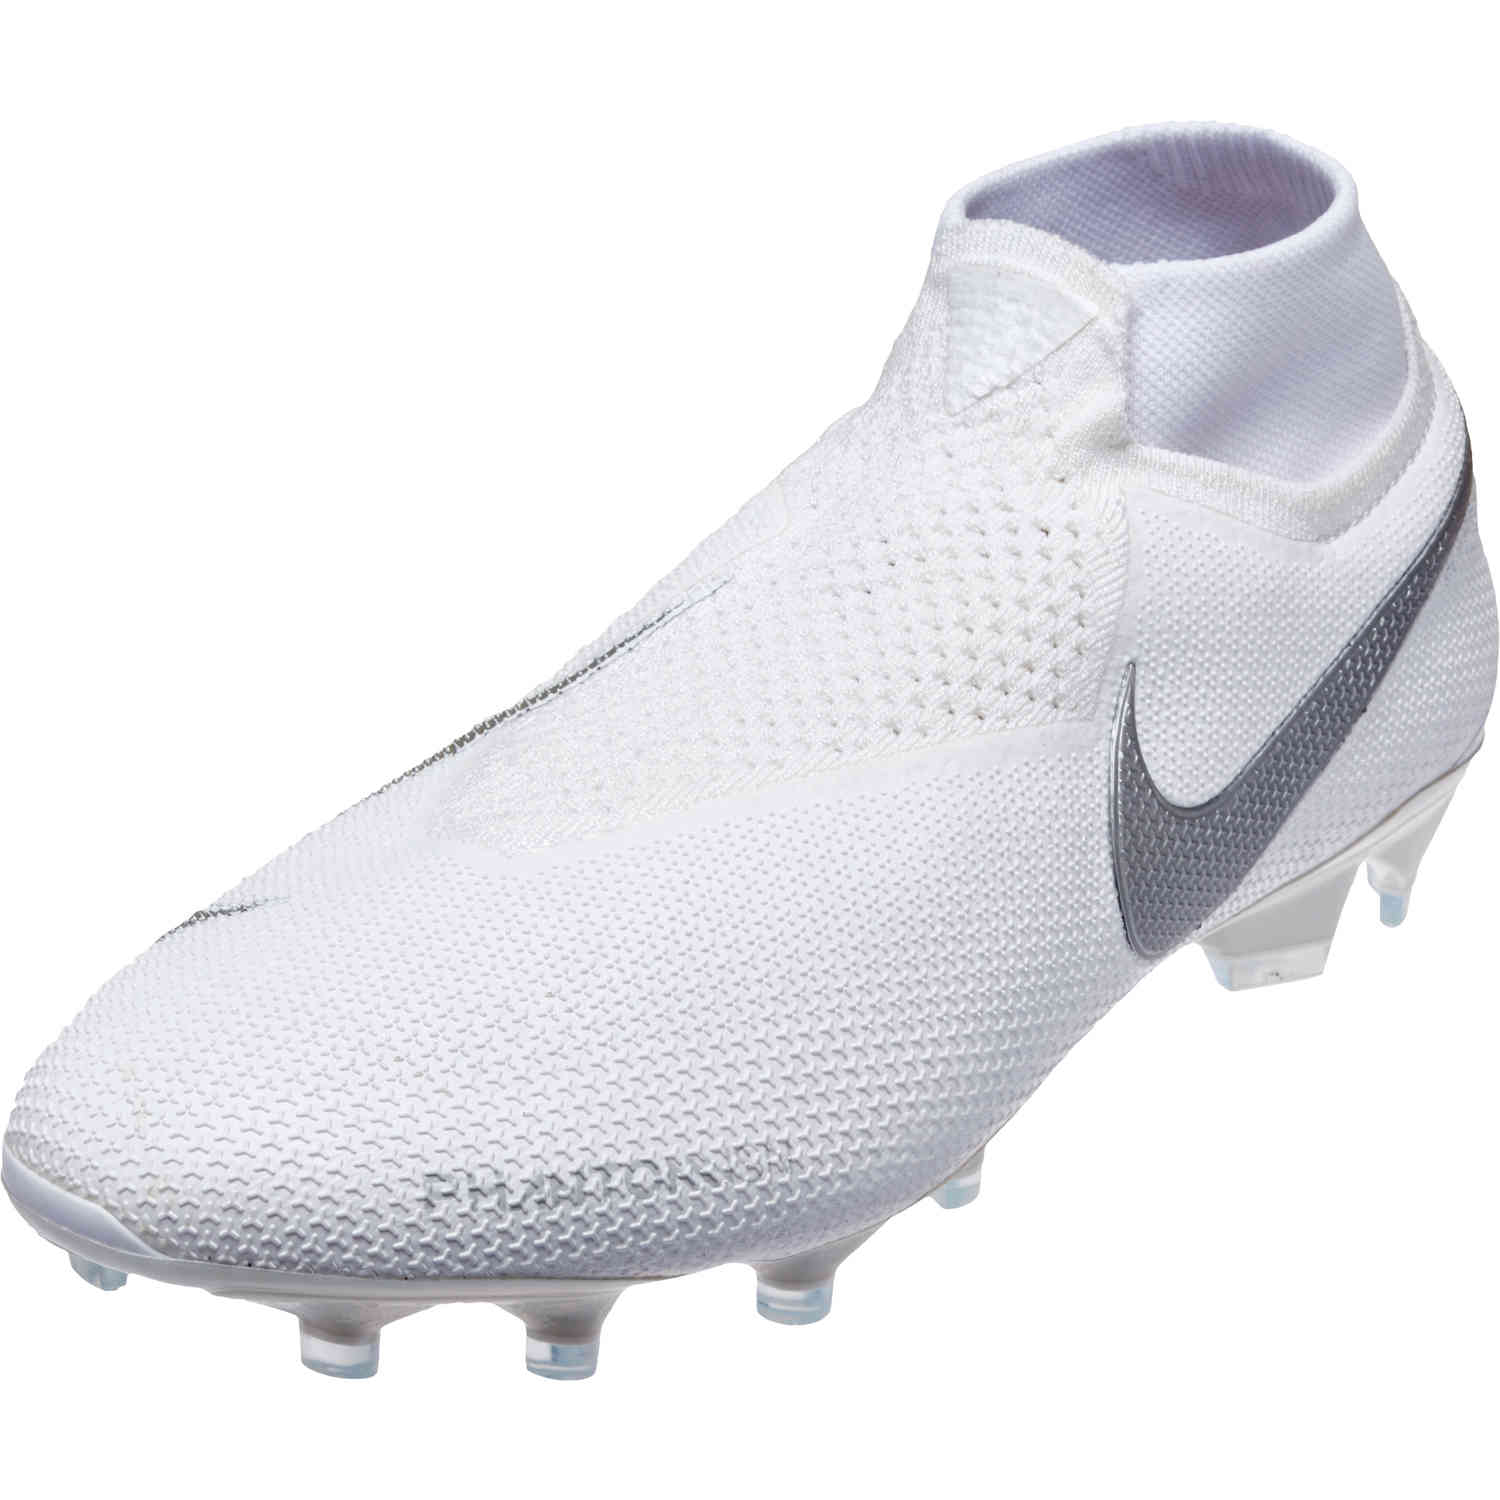 ghost lace soccer cleats